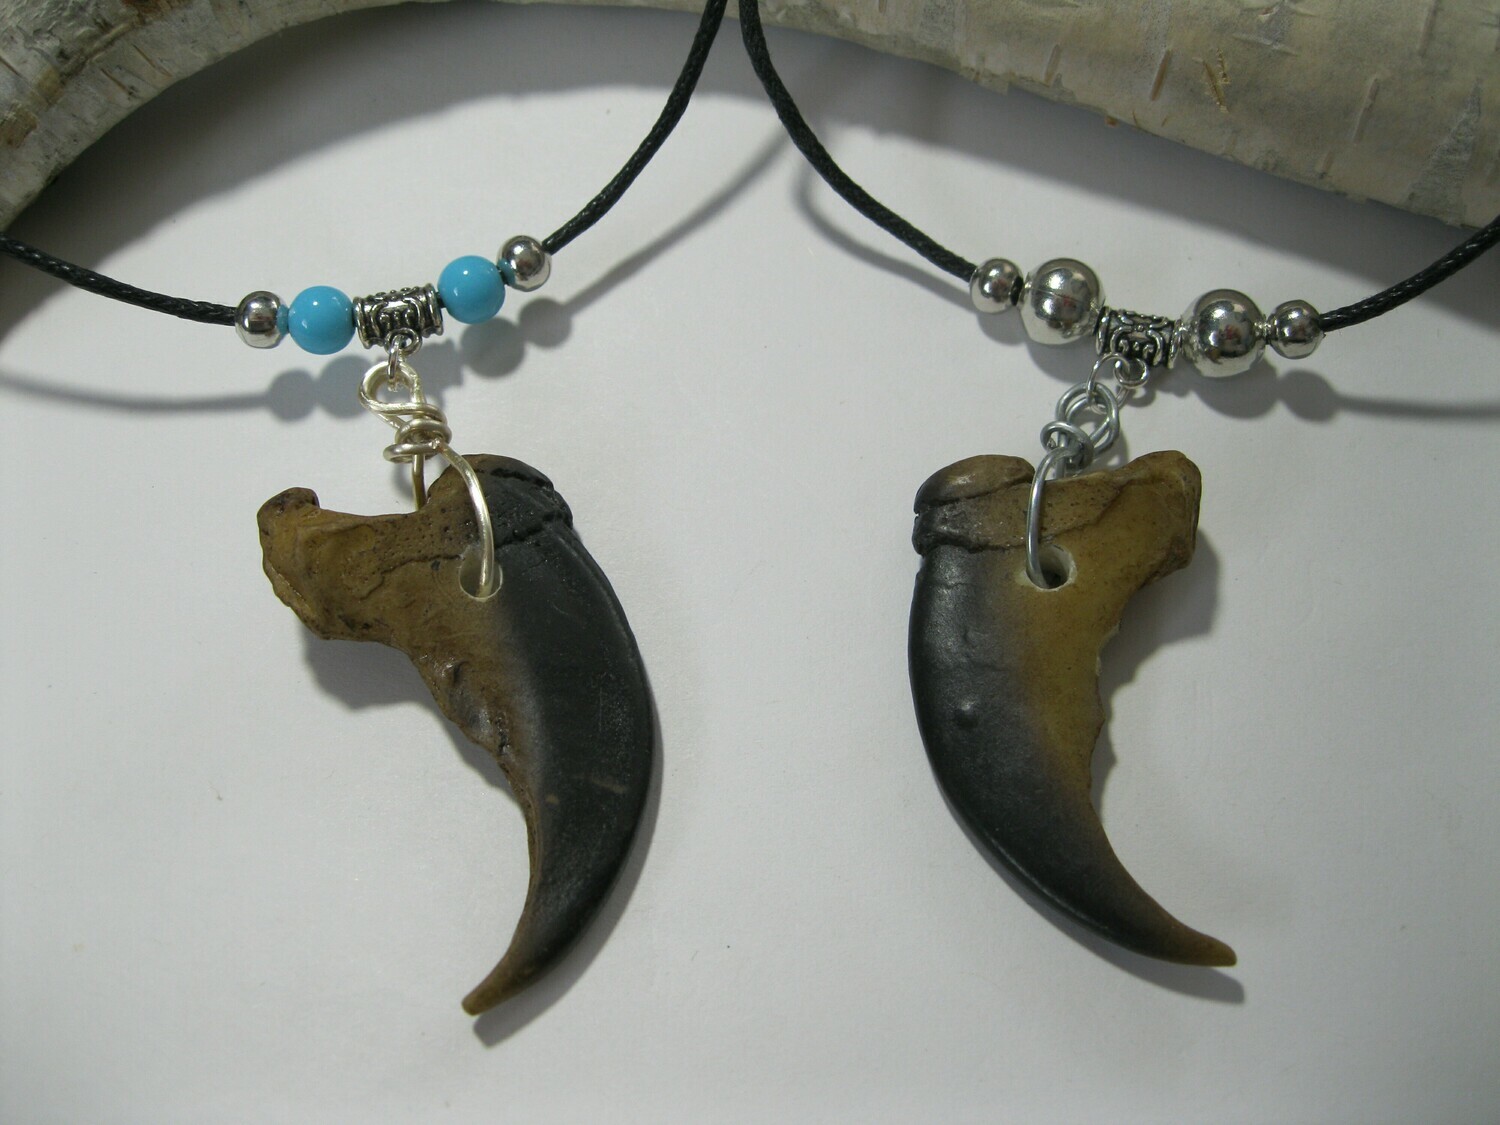 Bear Claw necklace, resin, 1 pc. #RBC